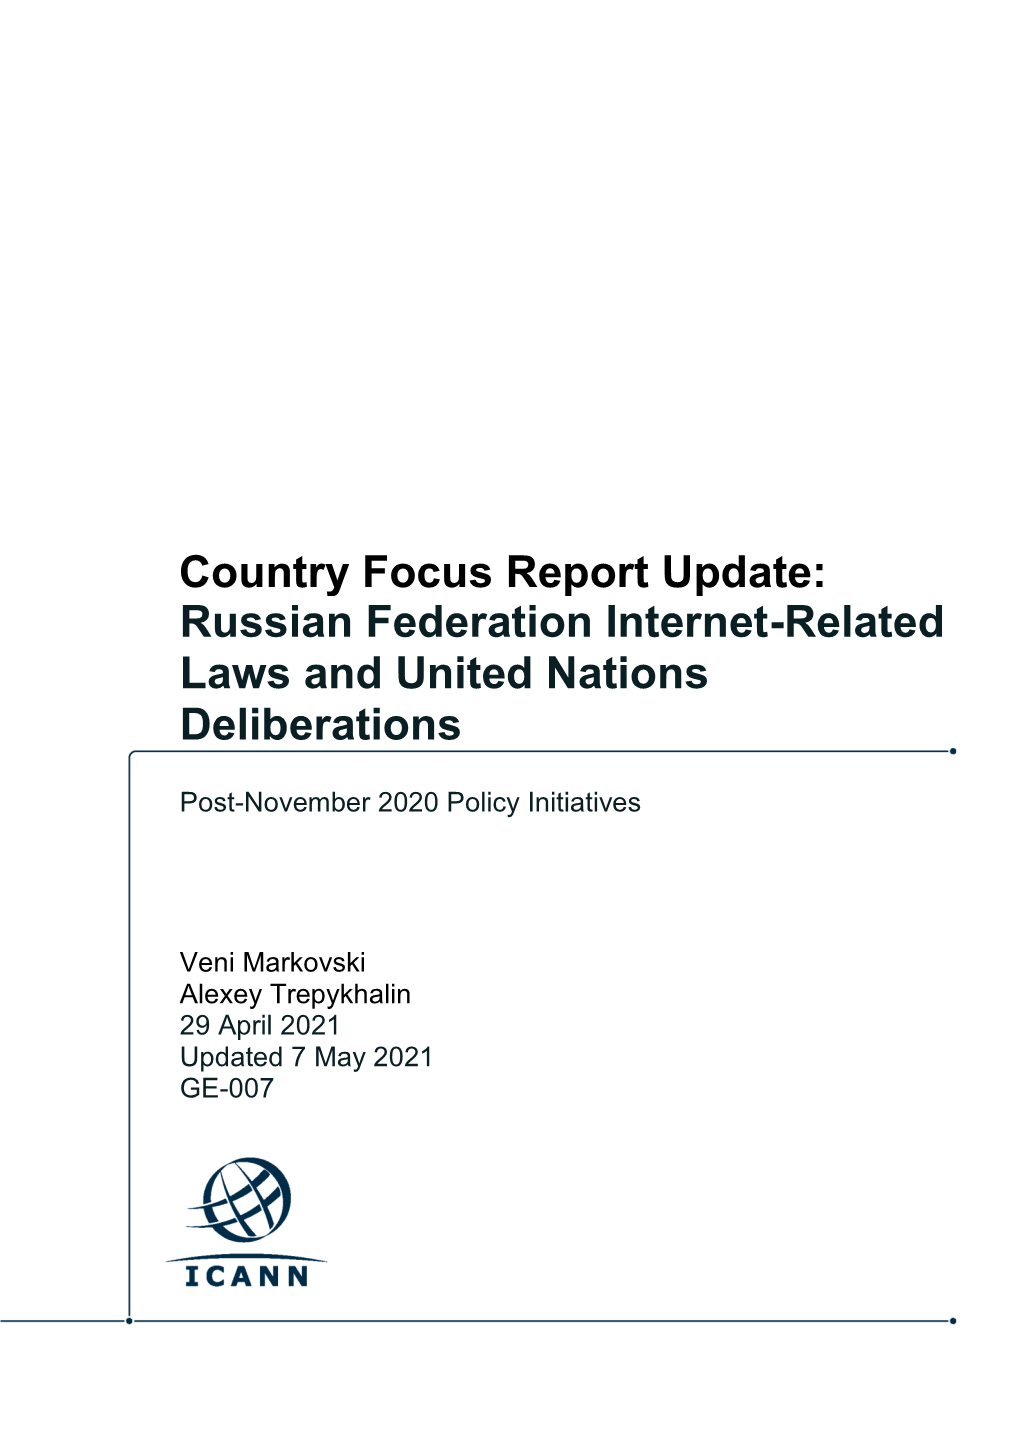 Russian Federation Internet-Related Laws and United Nations Deliberations